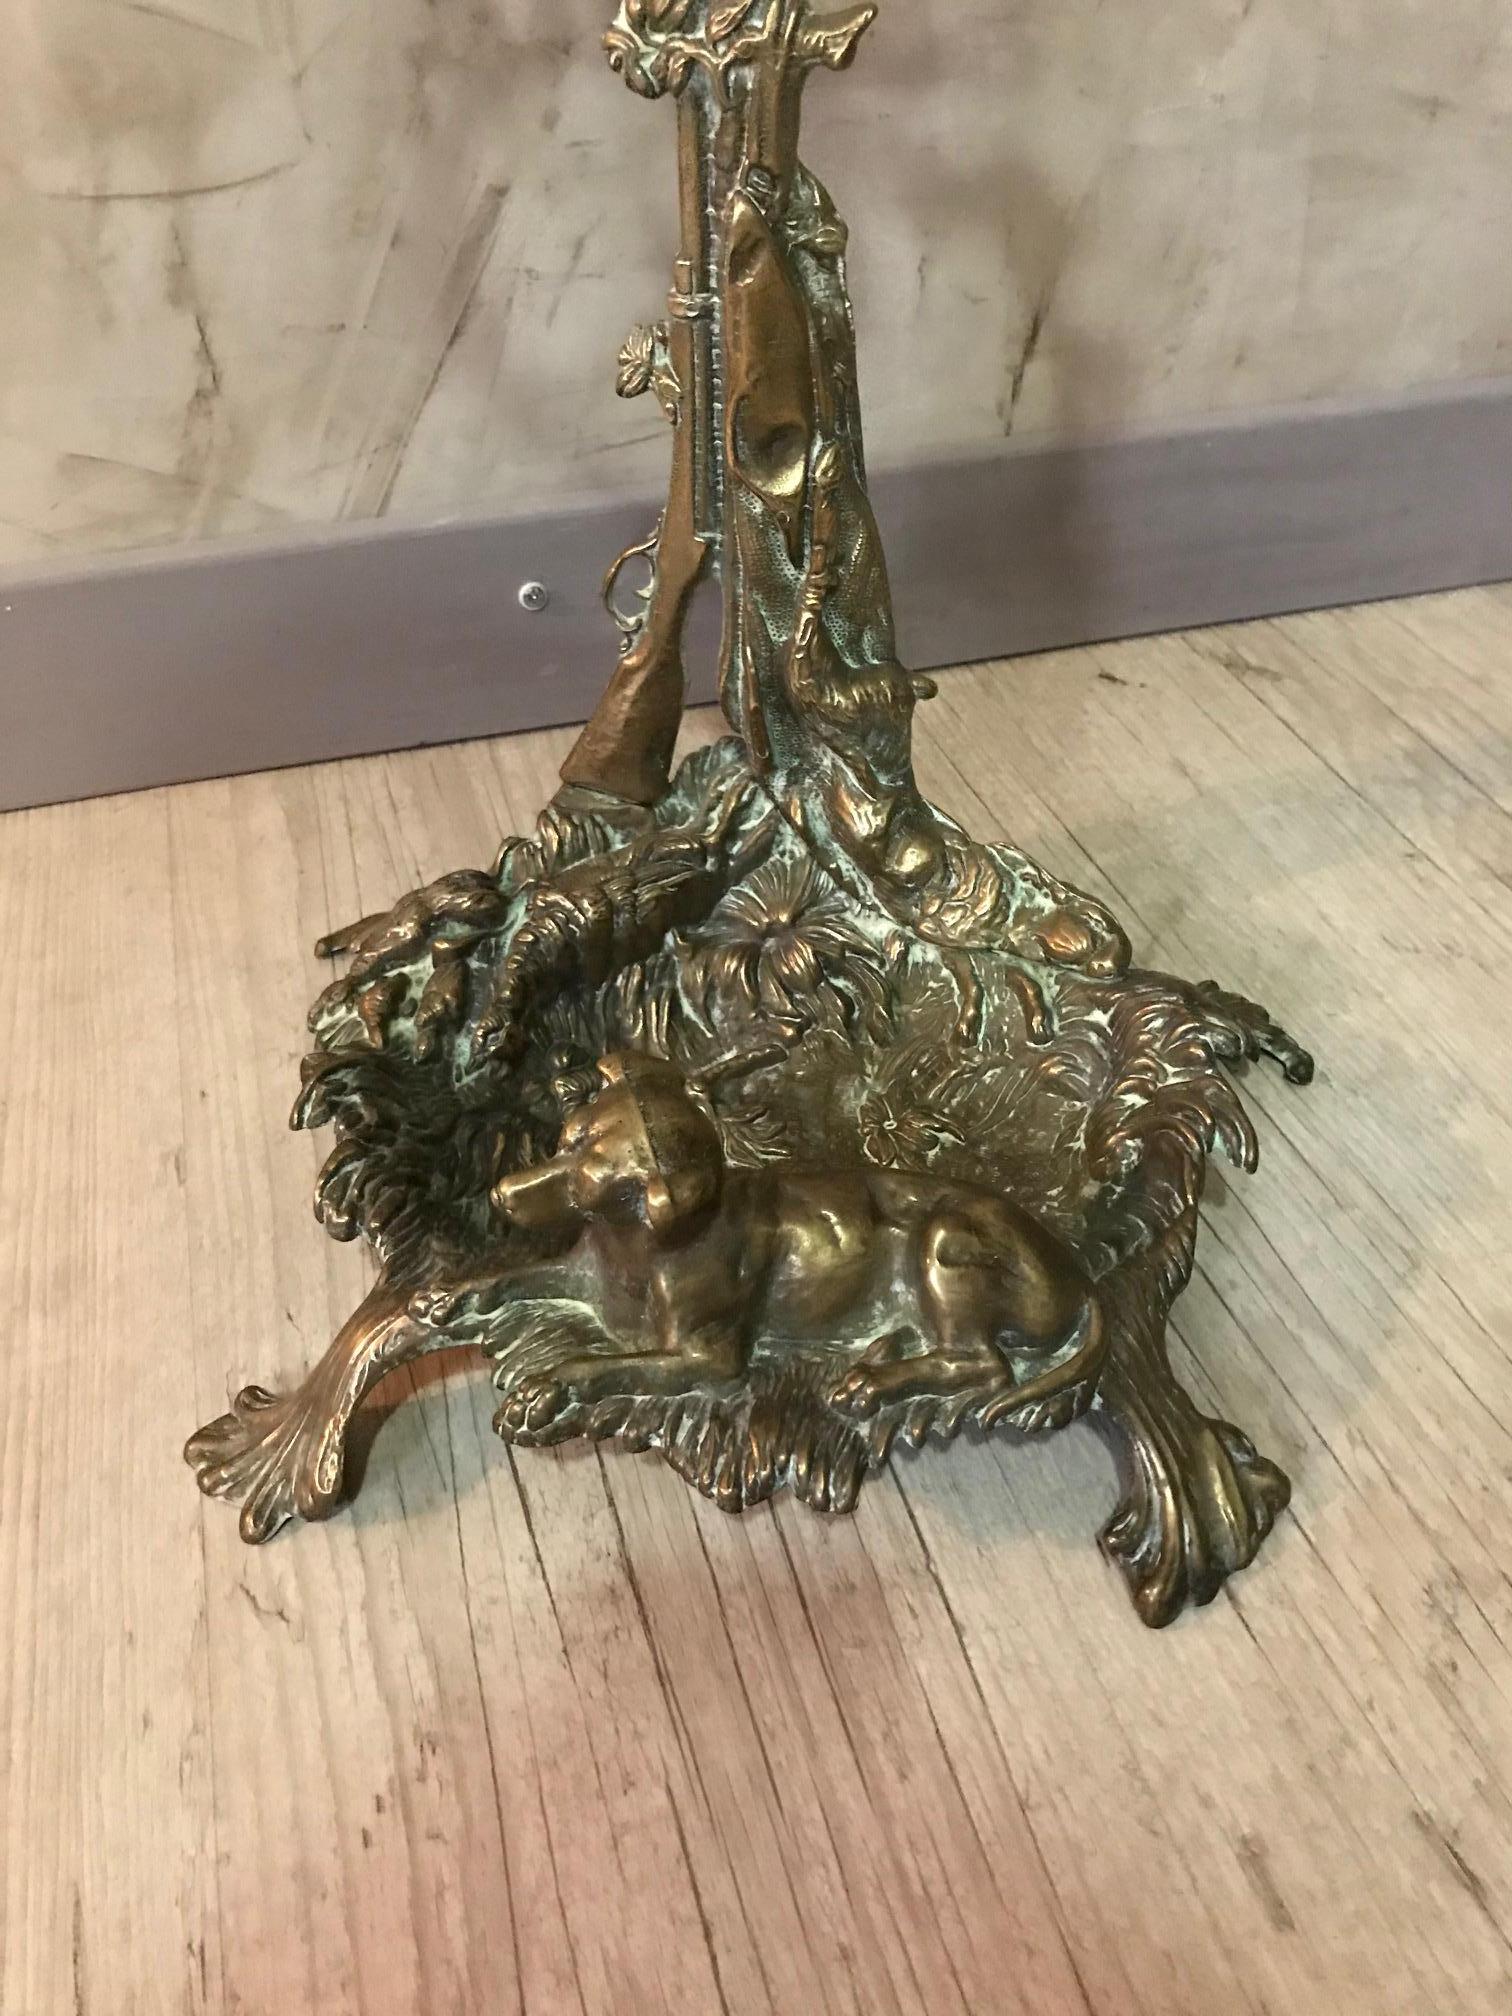 Very nice and original 20th century French gilded brass umbrella holder from the 1900s.
Court hunting scene: a dog, a rifle, a rabbit, a hunting Horn.
Nice quality.